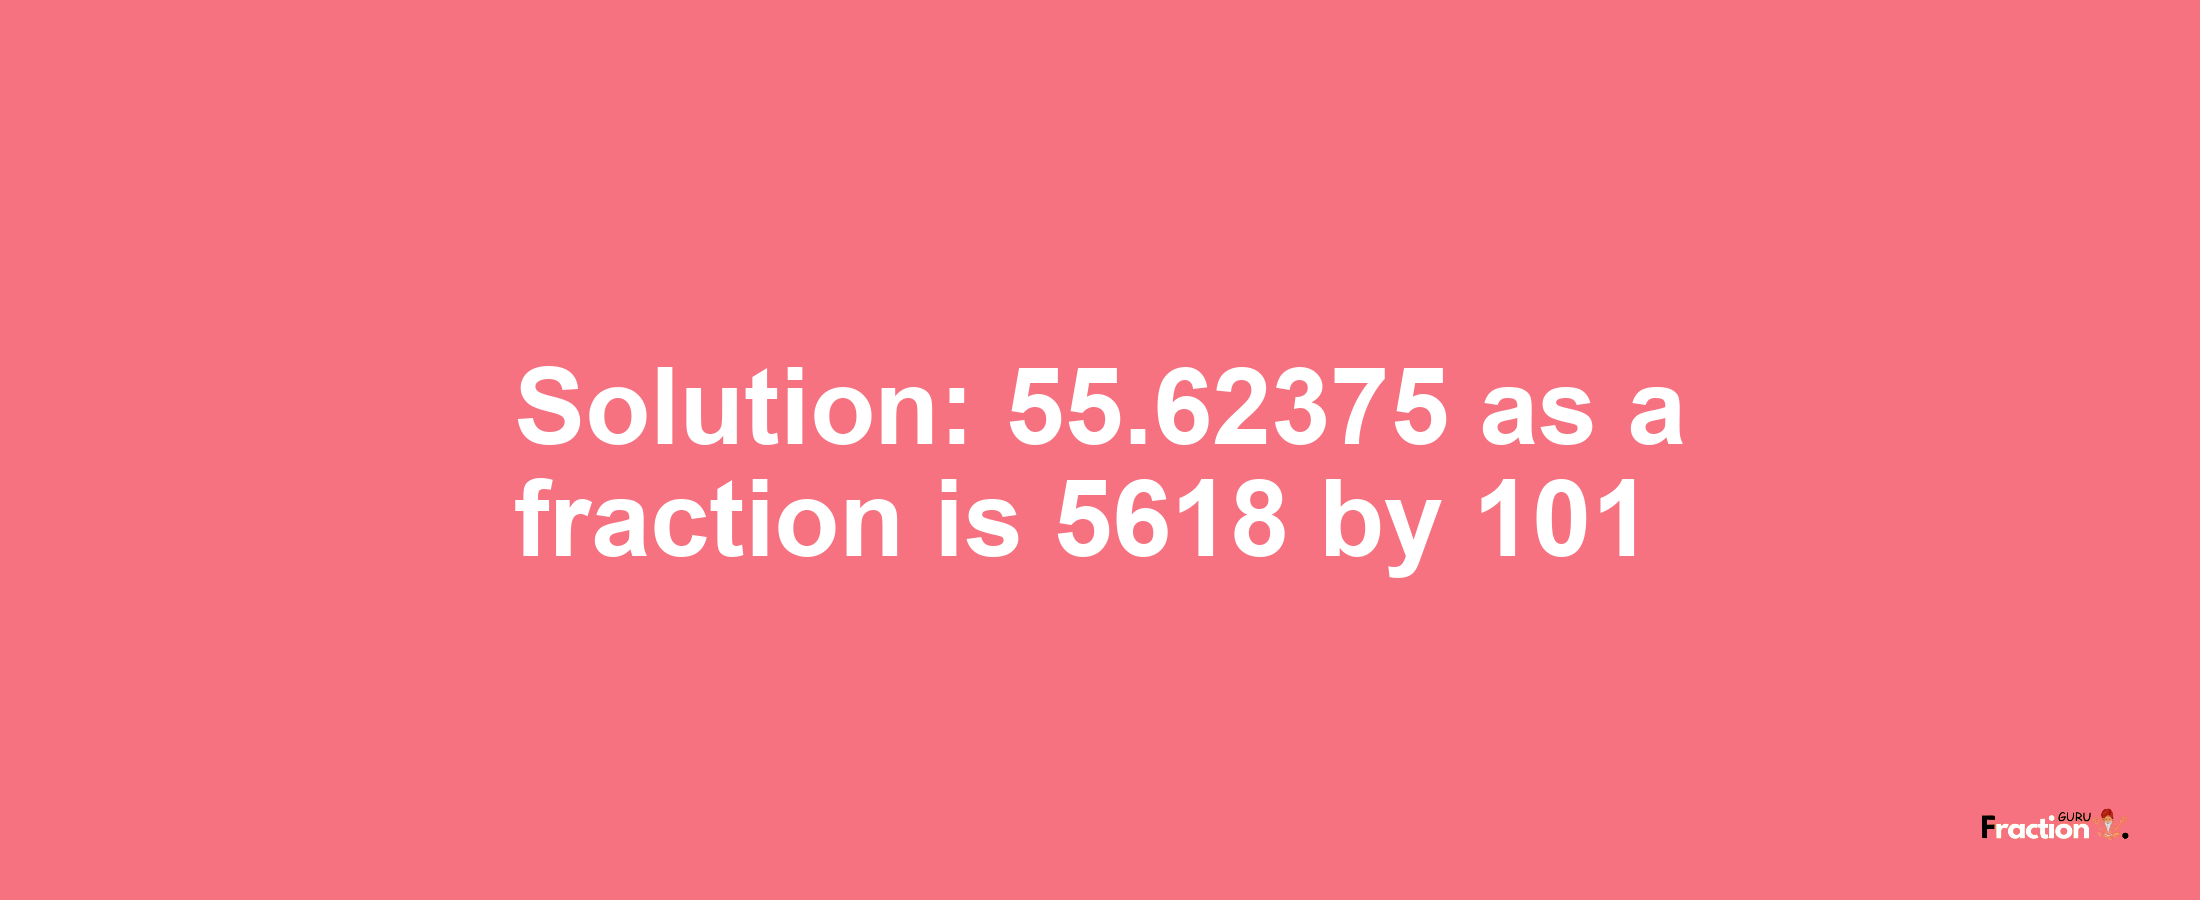 Solution:55.62375 as a fraction is 5618/101